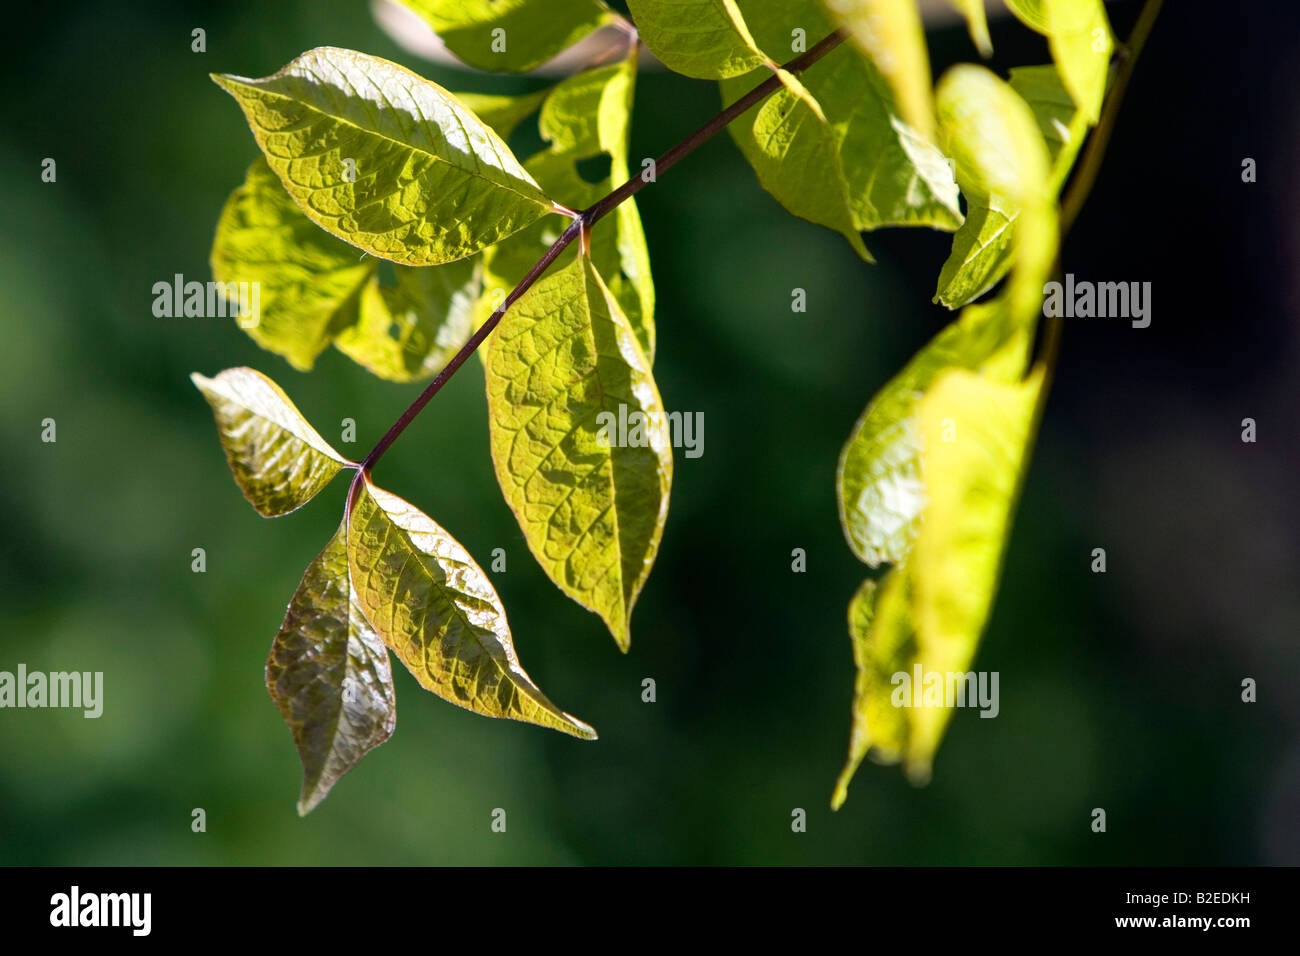 Sunshining on the green leaves of a tree Stock Photo